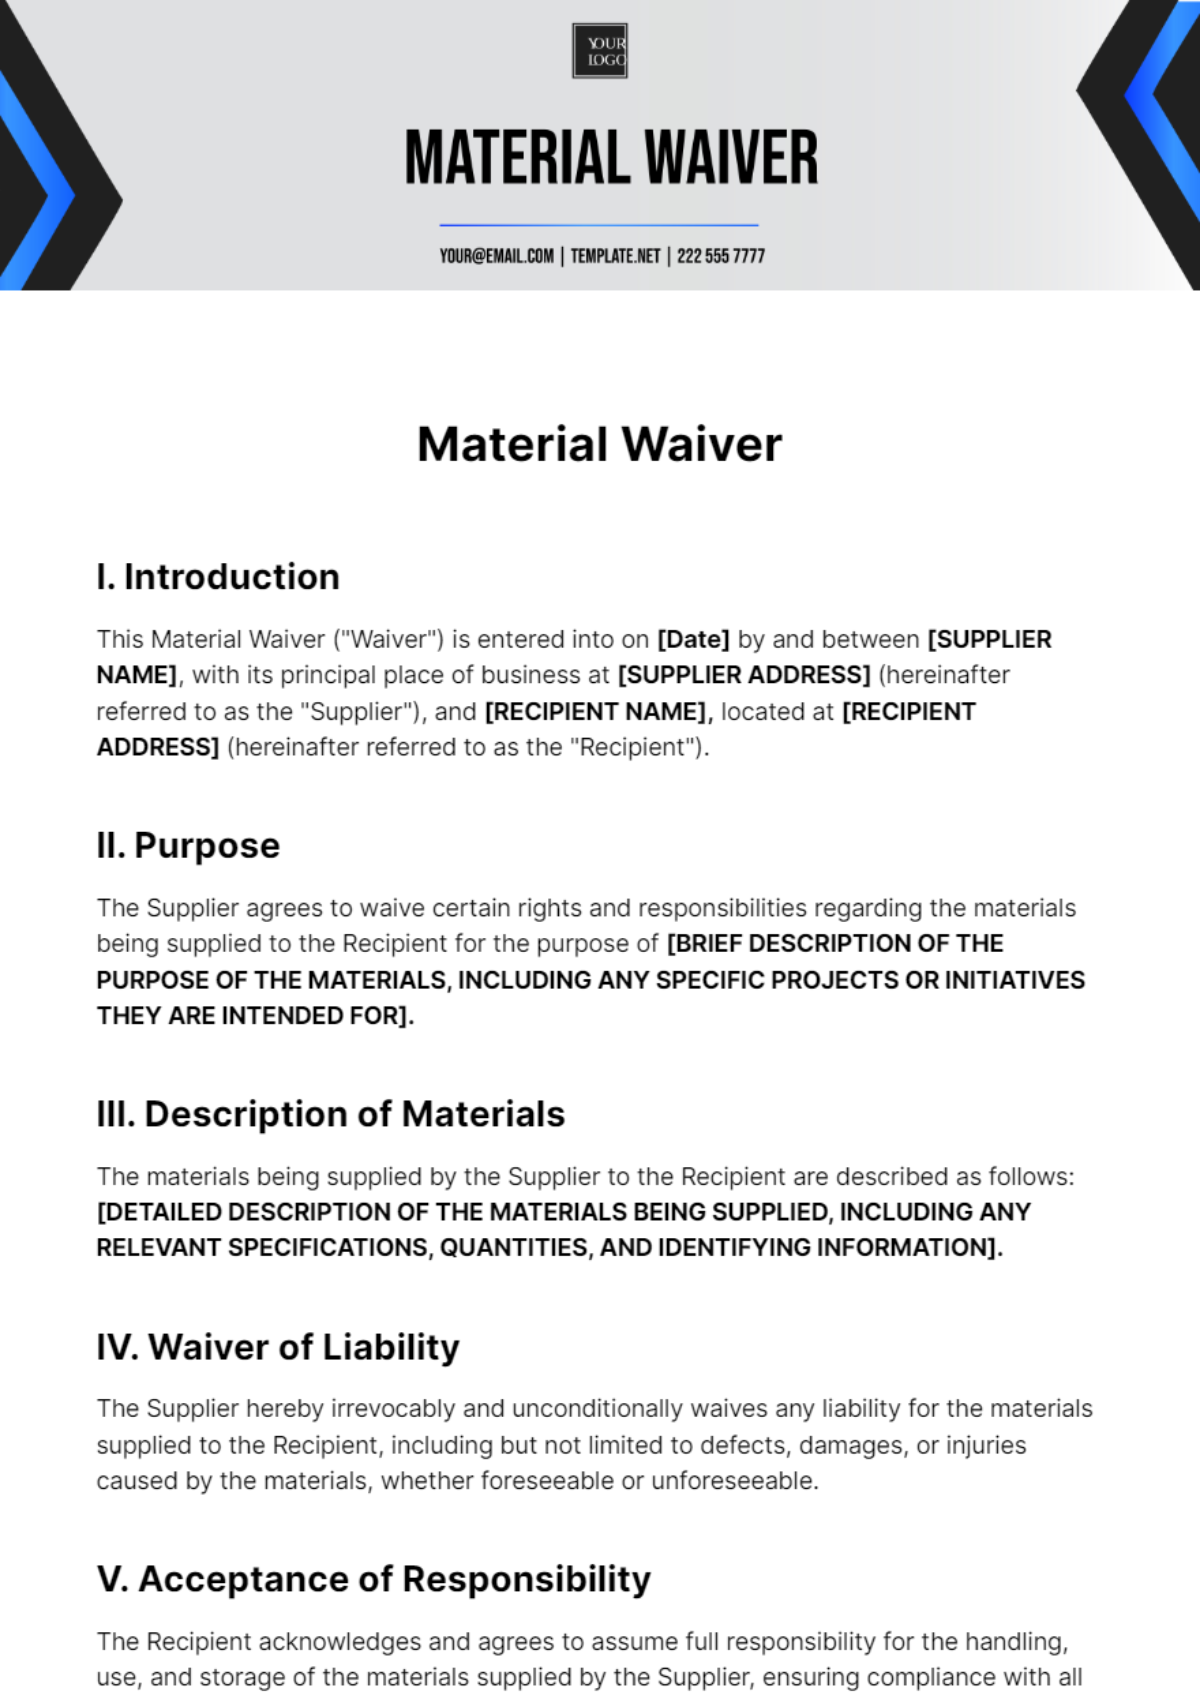 Free Material Waiver Template